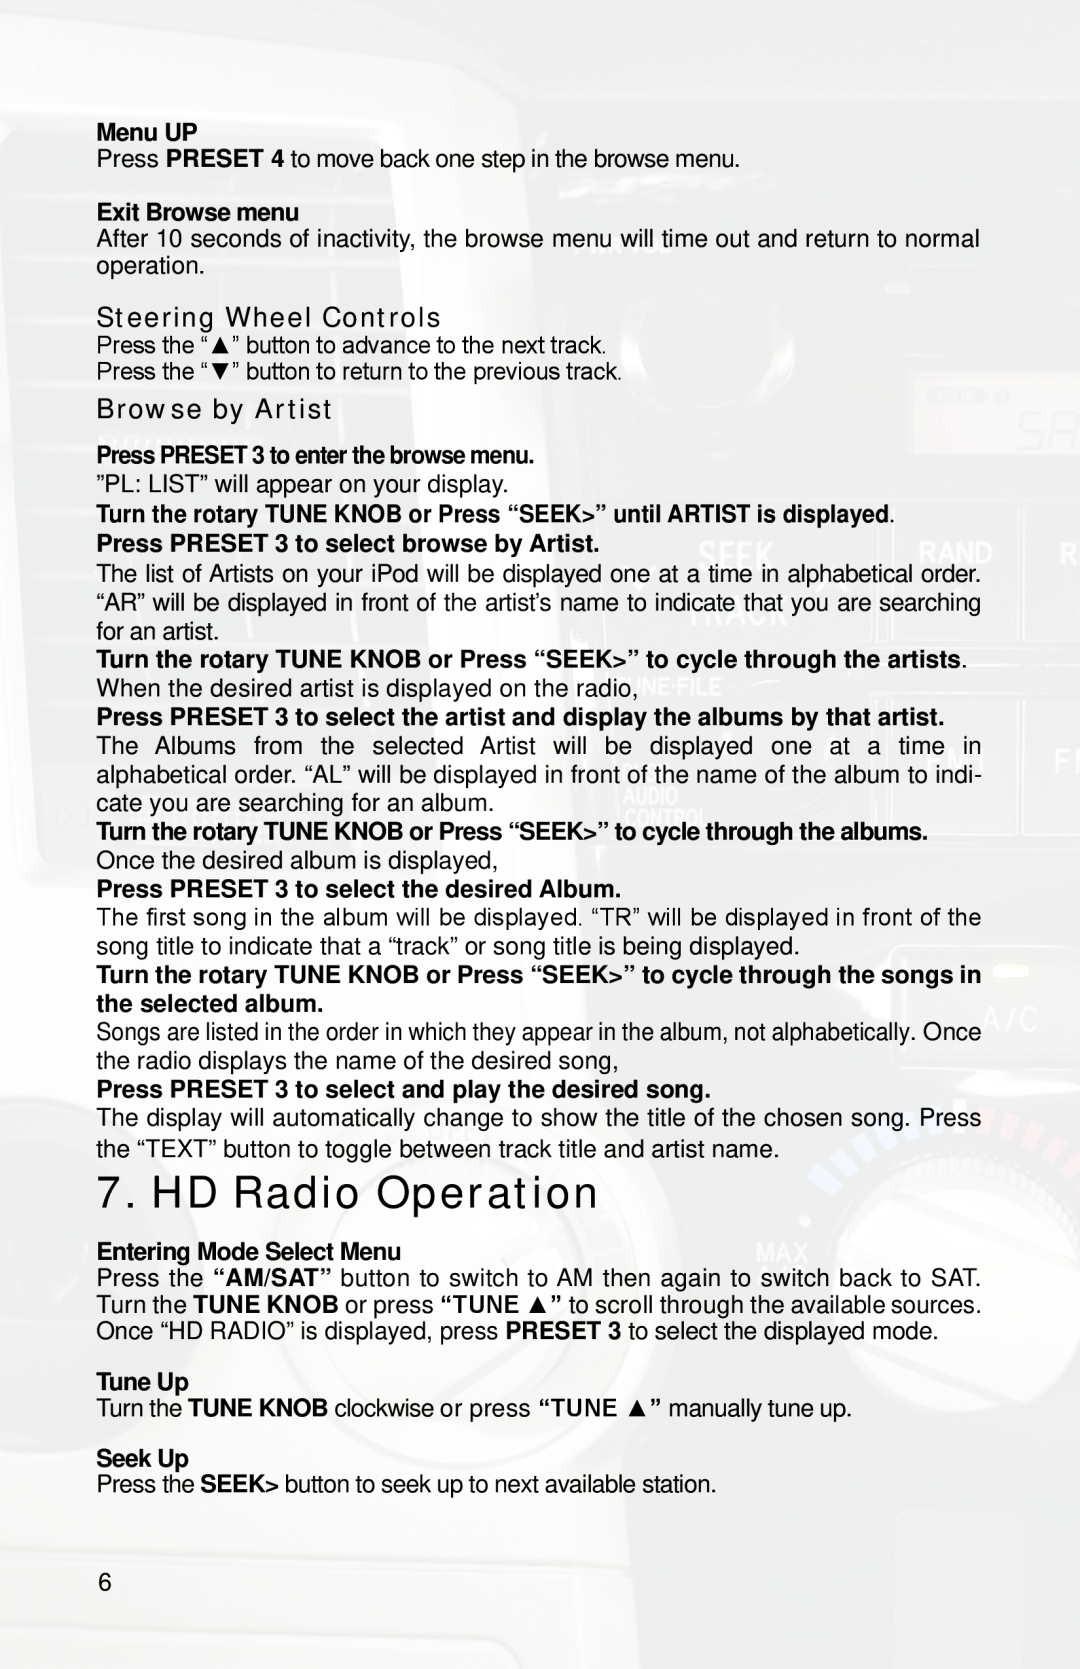 iSimple PGHTY1 owner manual HD Radio Operation, Steering Wheel Controls, Browse by Artist 